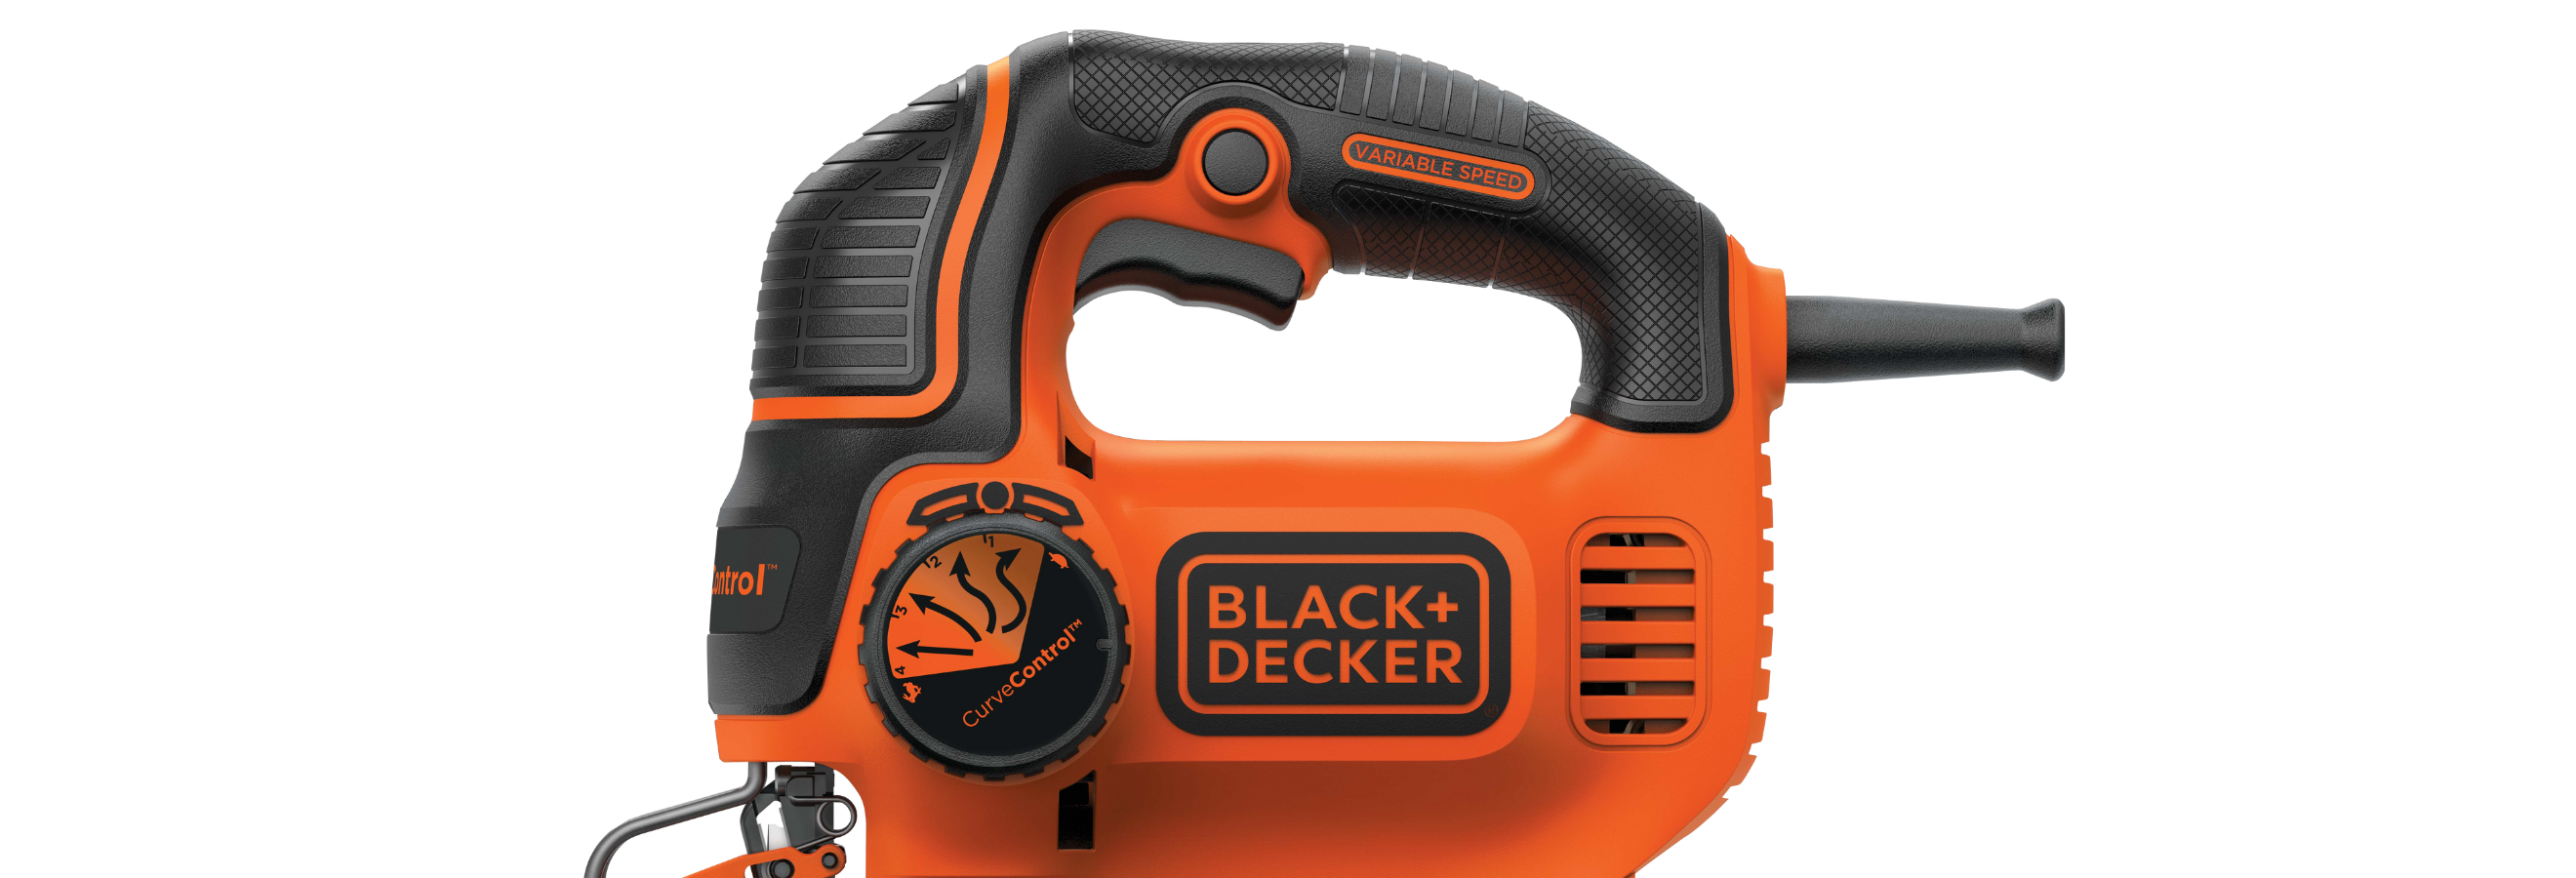 Black and Decker 2 Speed Jig Saw  Jolly Pack Rat Quality Second Hand  Internet Store